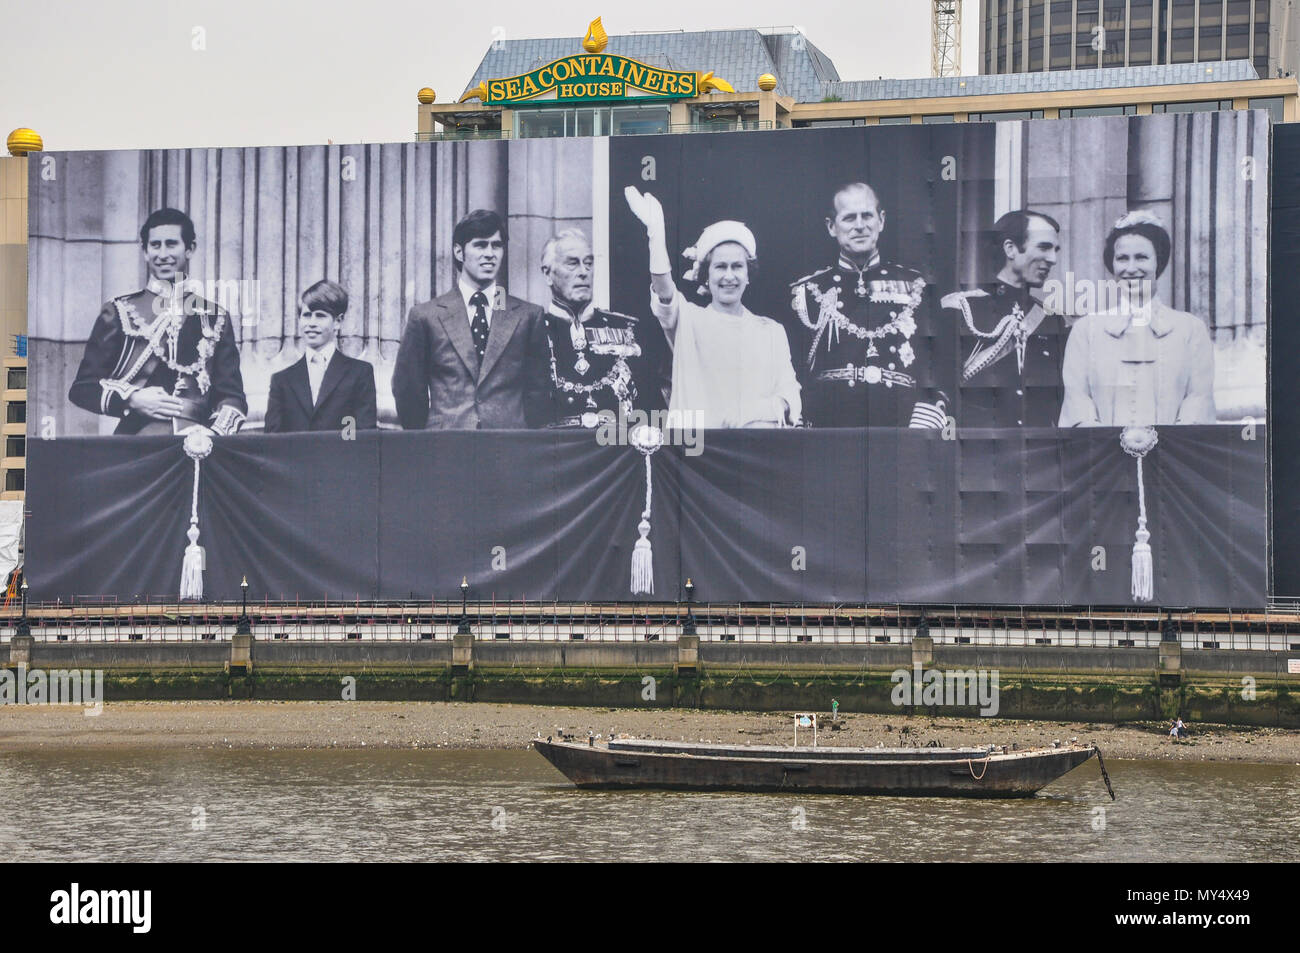 Sea containers House, River Thames, London with royal family picture in celebration of the Diamond Jubilee in 2012 London. Queen Elizabeth Stock Photo